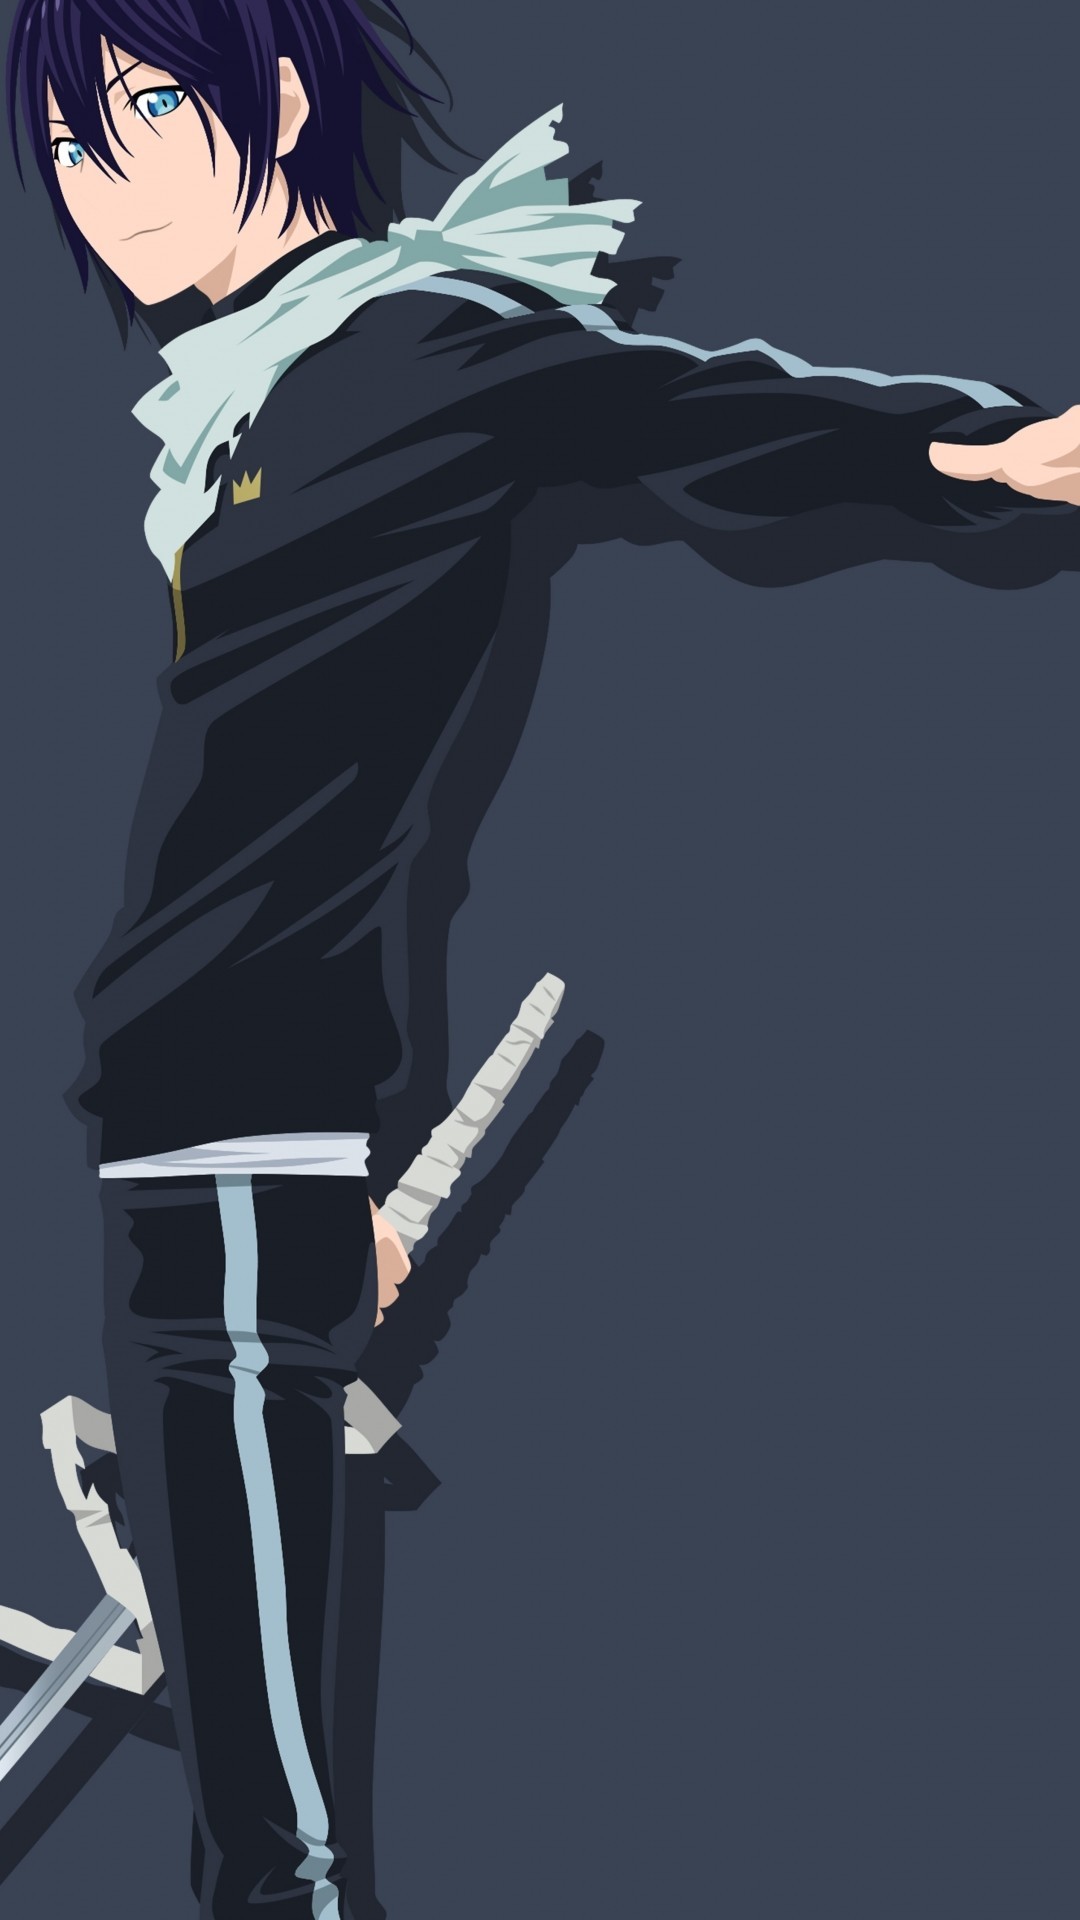 1080x1920 1920x1080 86 Yato (Noragami) HD Wallpapers | Backgrounds - Wallpaper Abyss